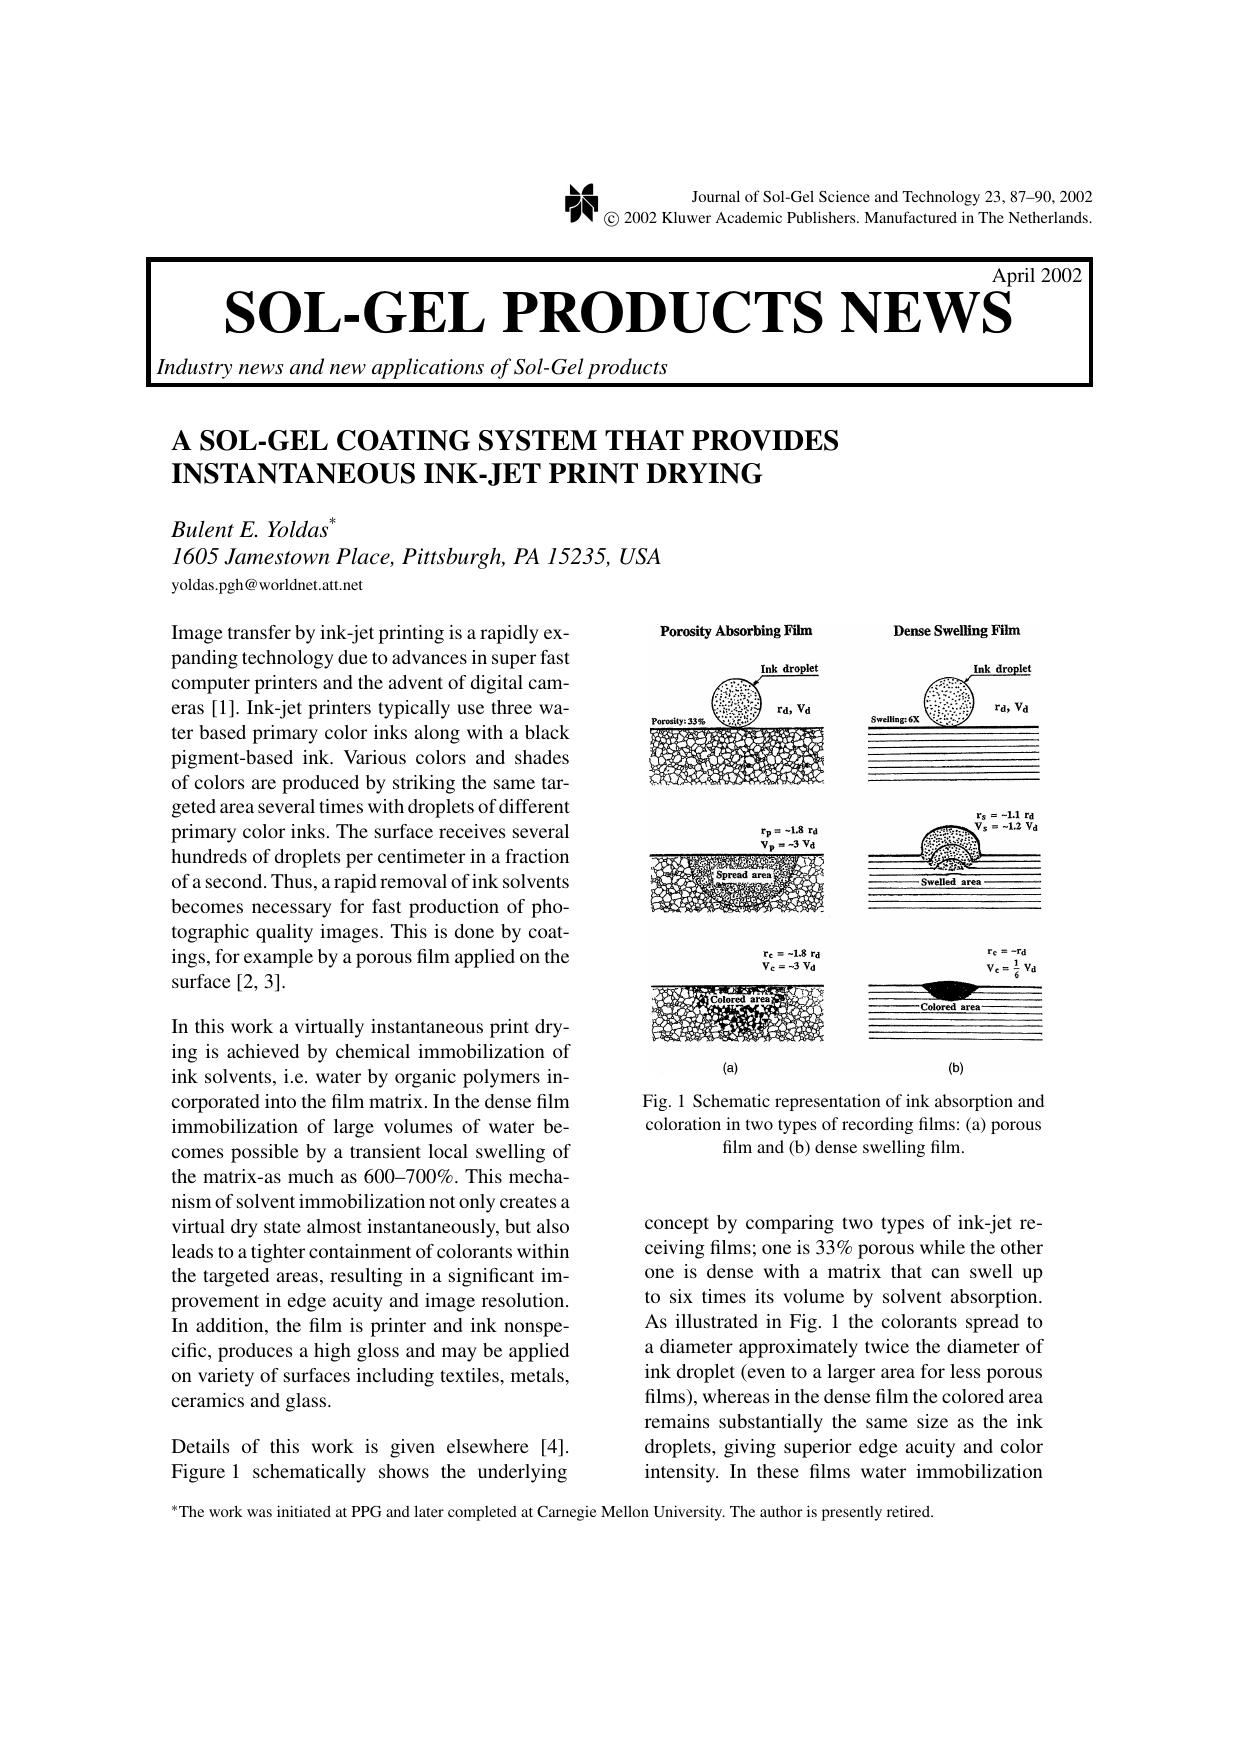 A Sol-Gel Coating System that Provides Instantaneous Ink-Jet Print Drying by Unknown